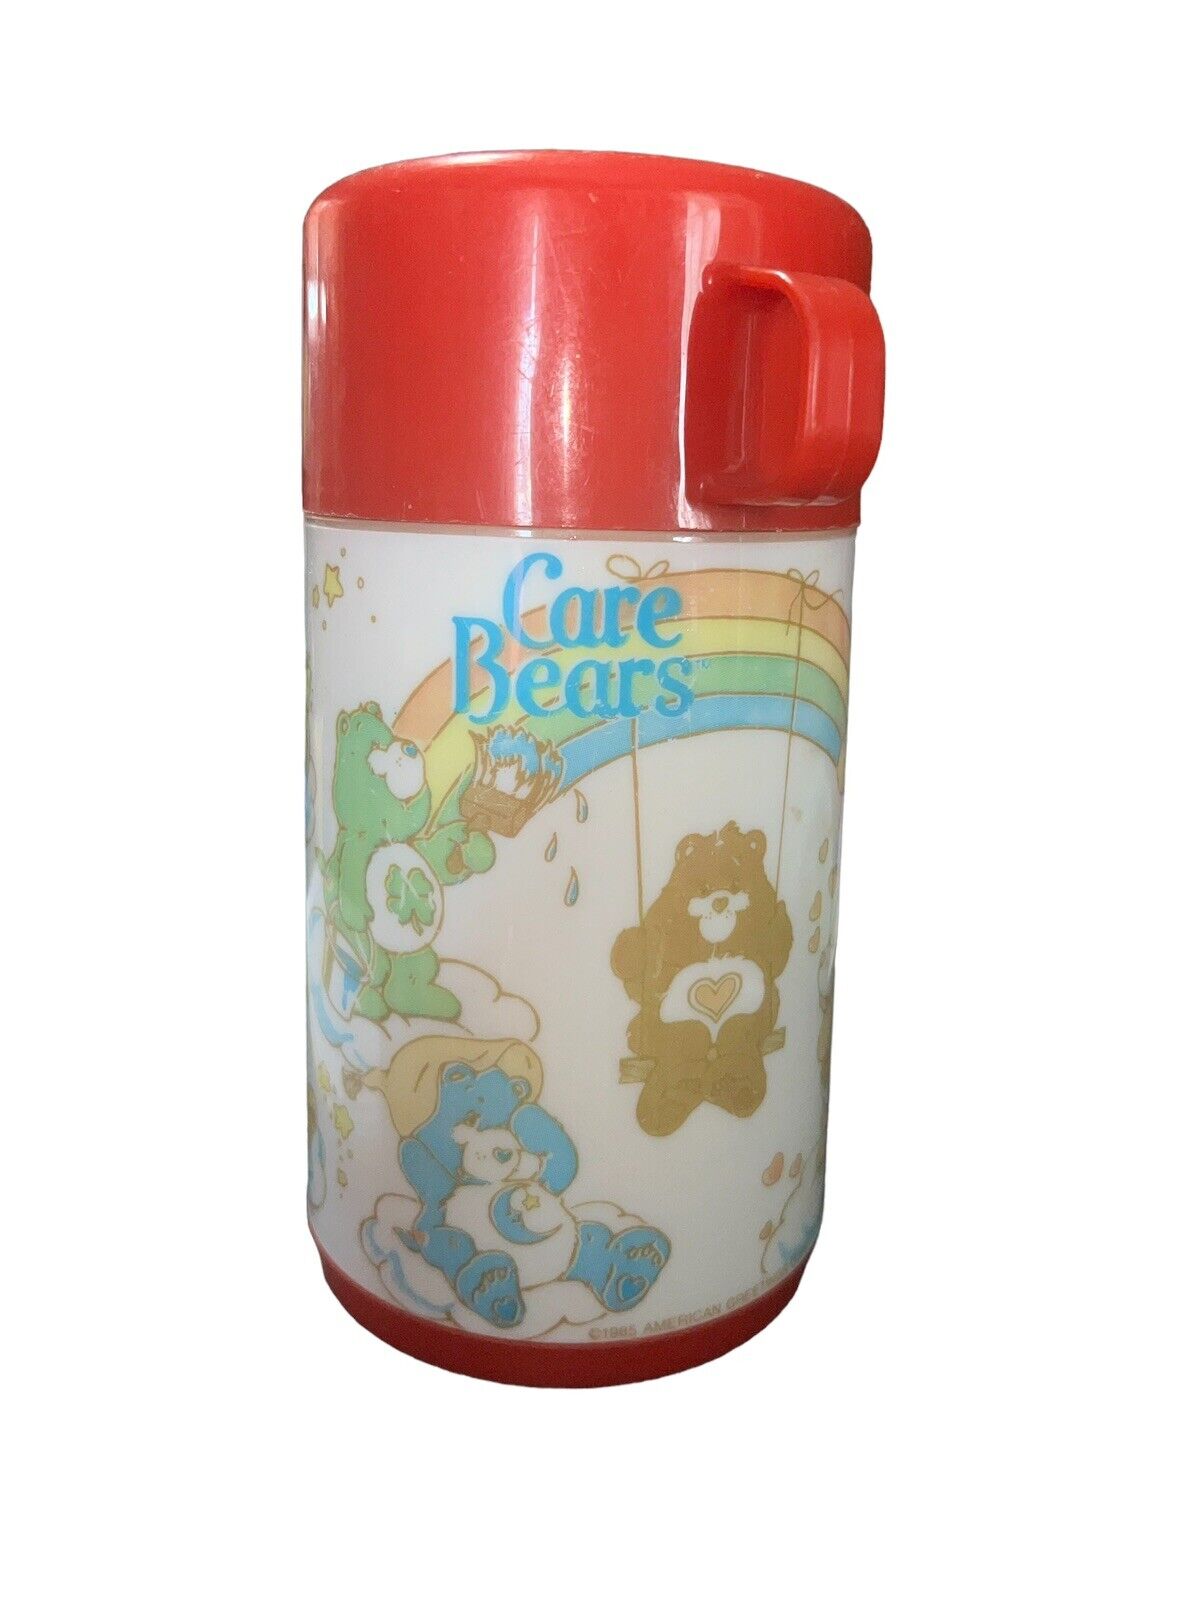 Vintage 1985 “Care Bears”Aladdin Lunchbox Thermos Red Cup